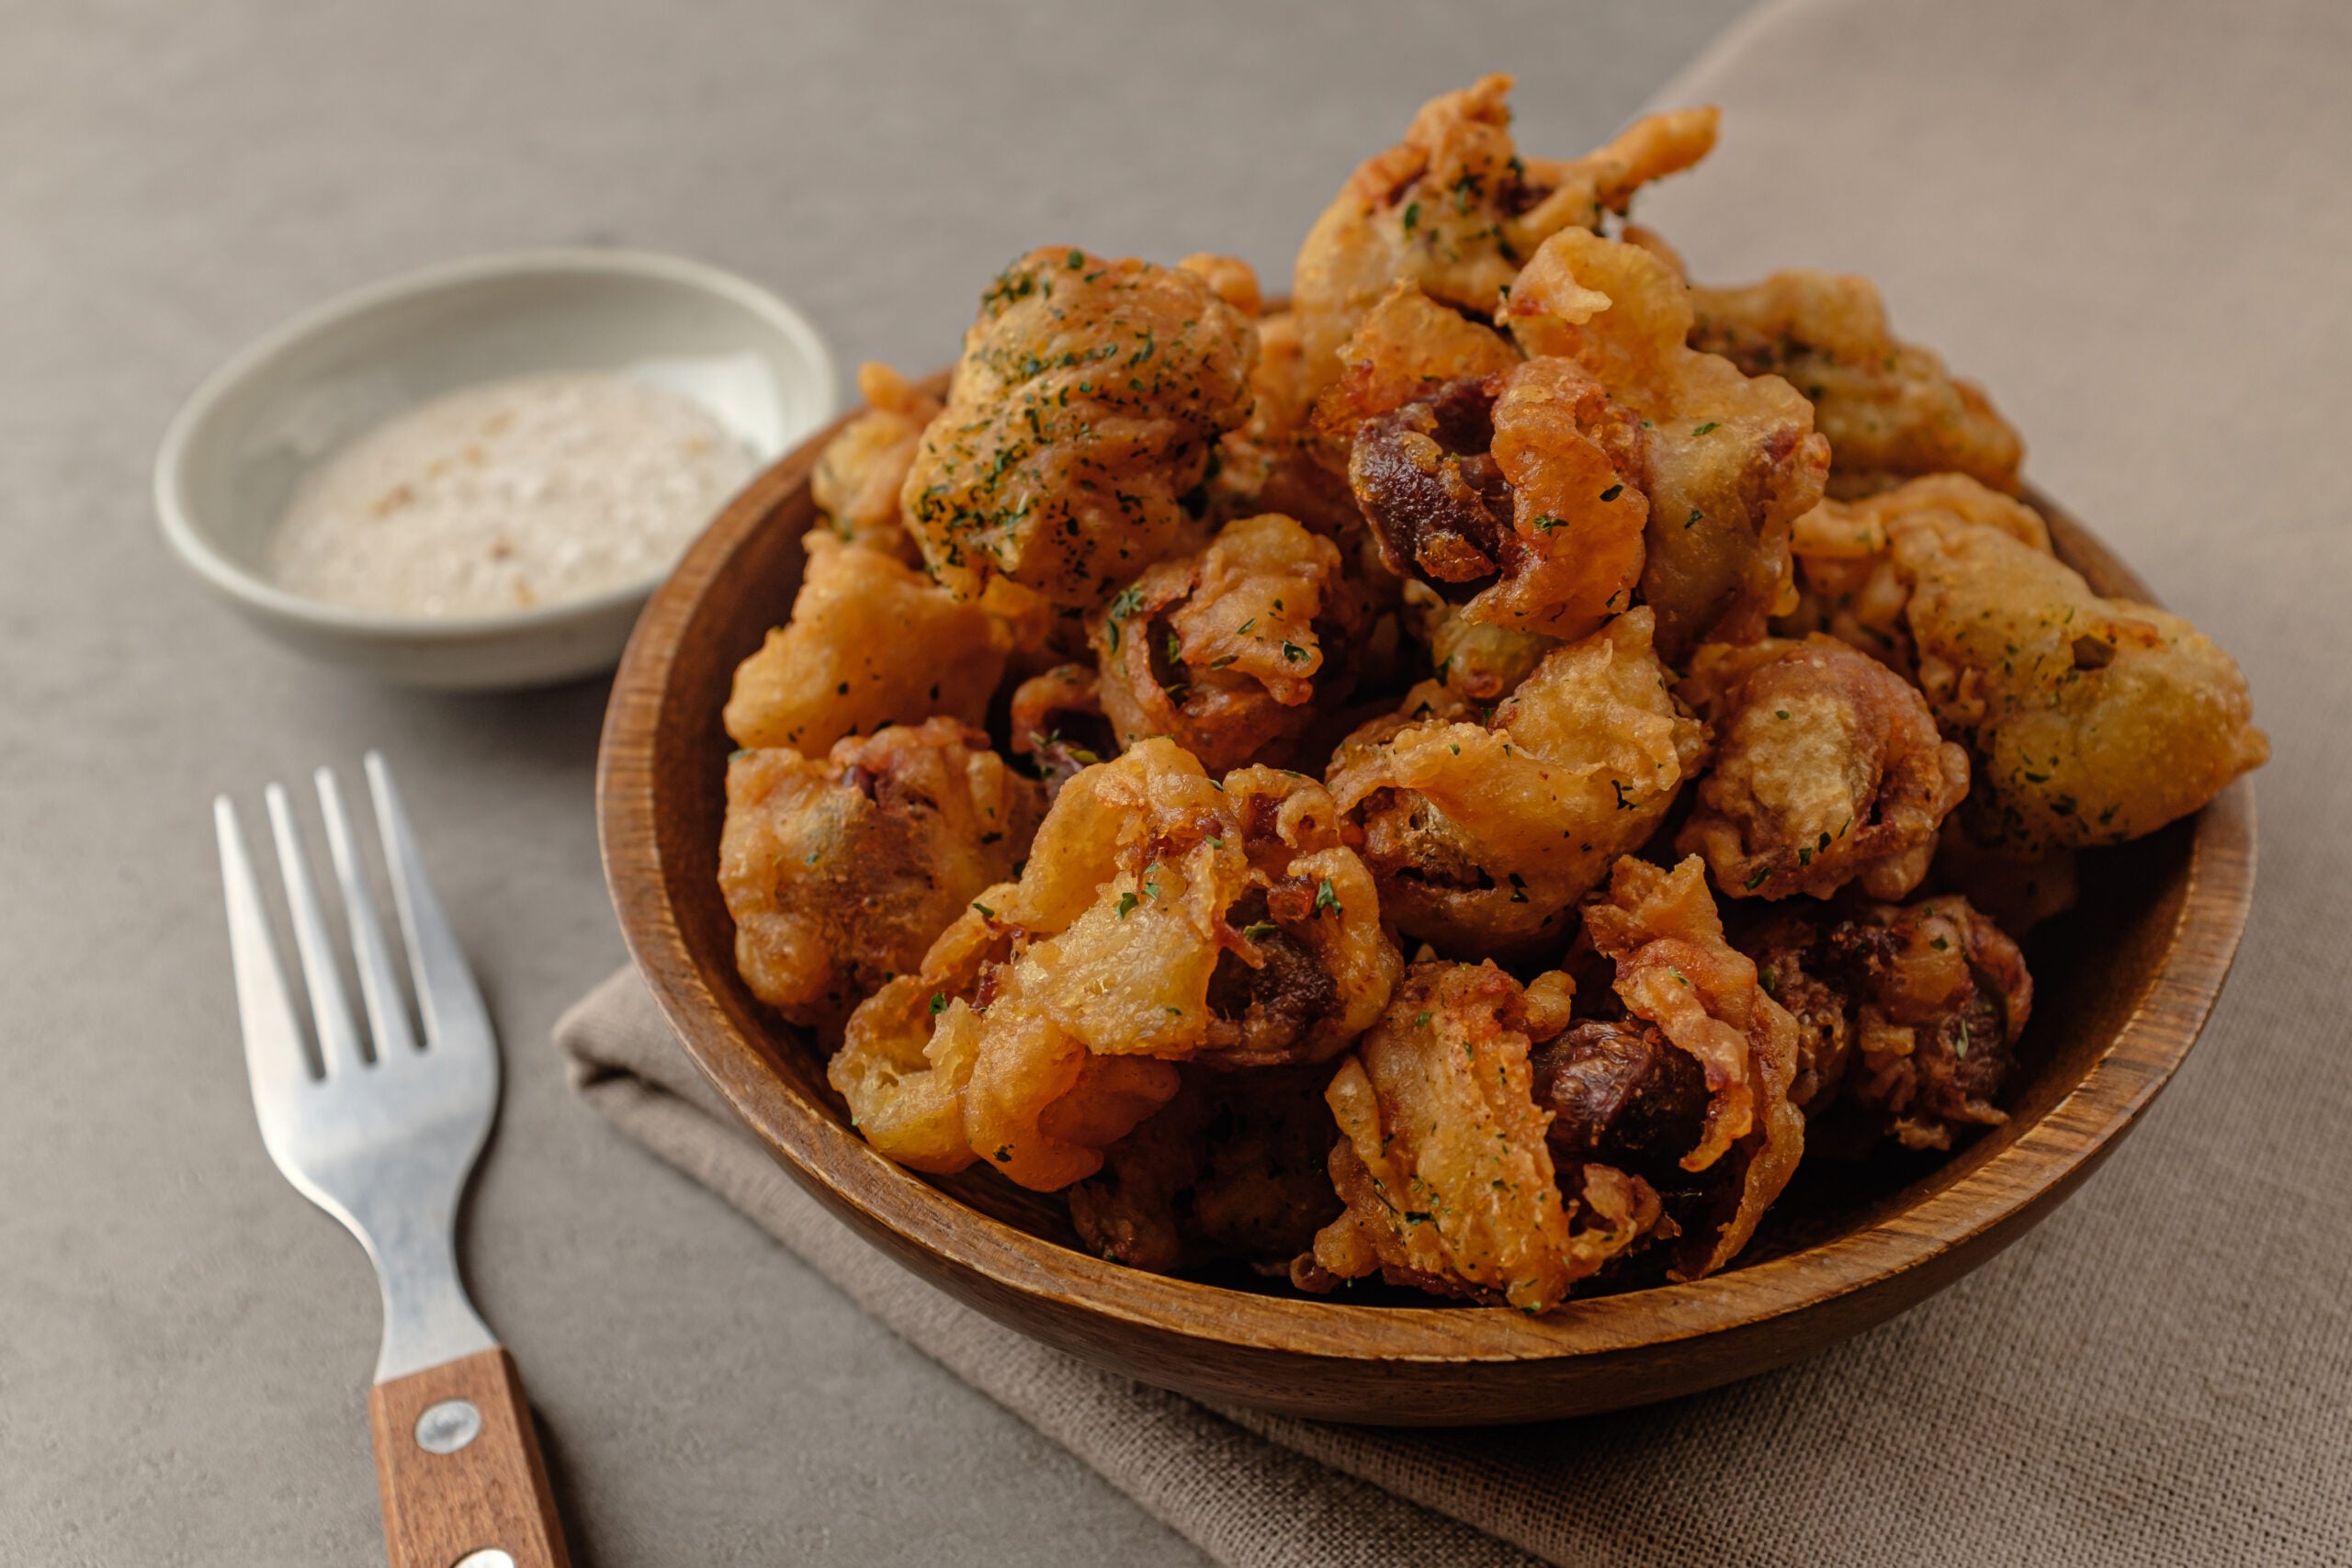 Seasoned and fried chicken gizzards served in a wooden bowl